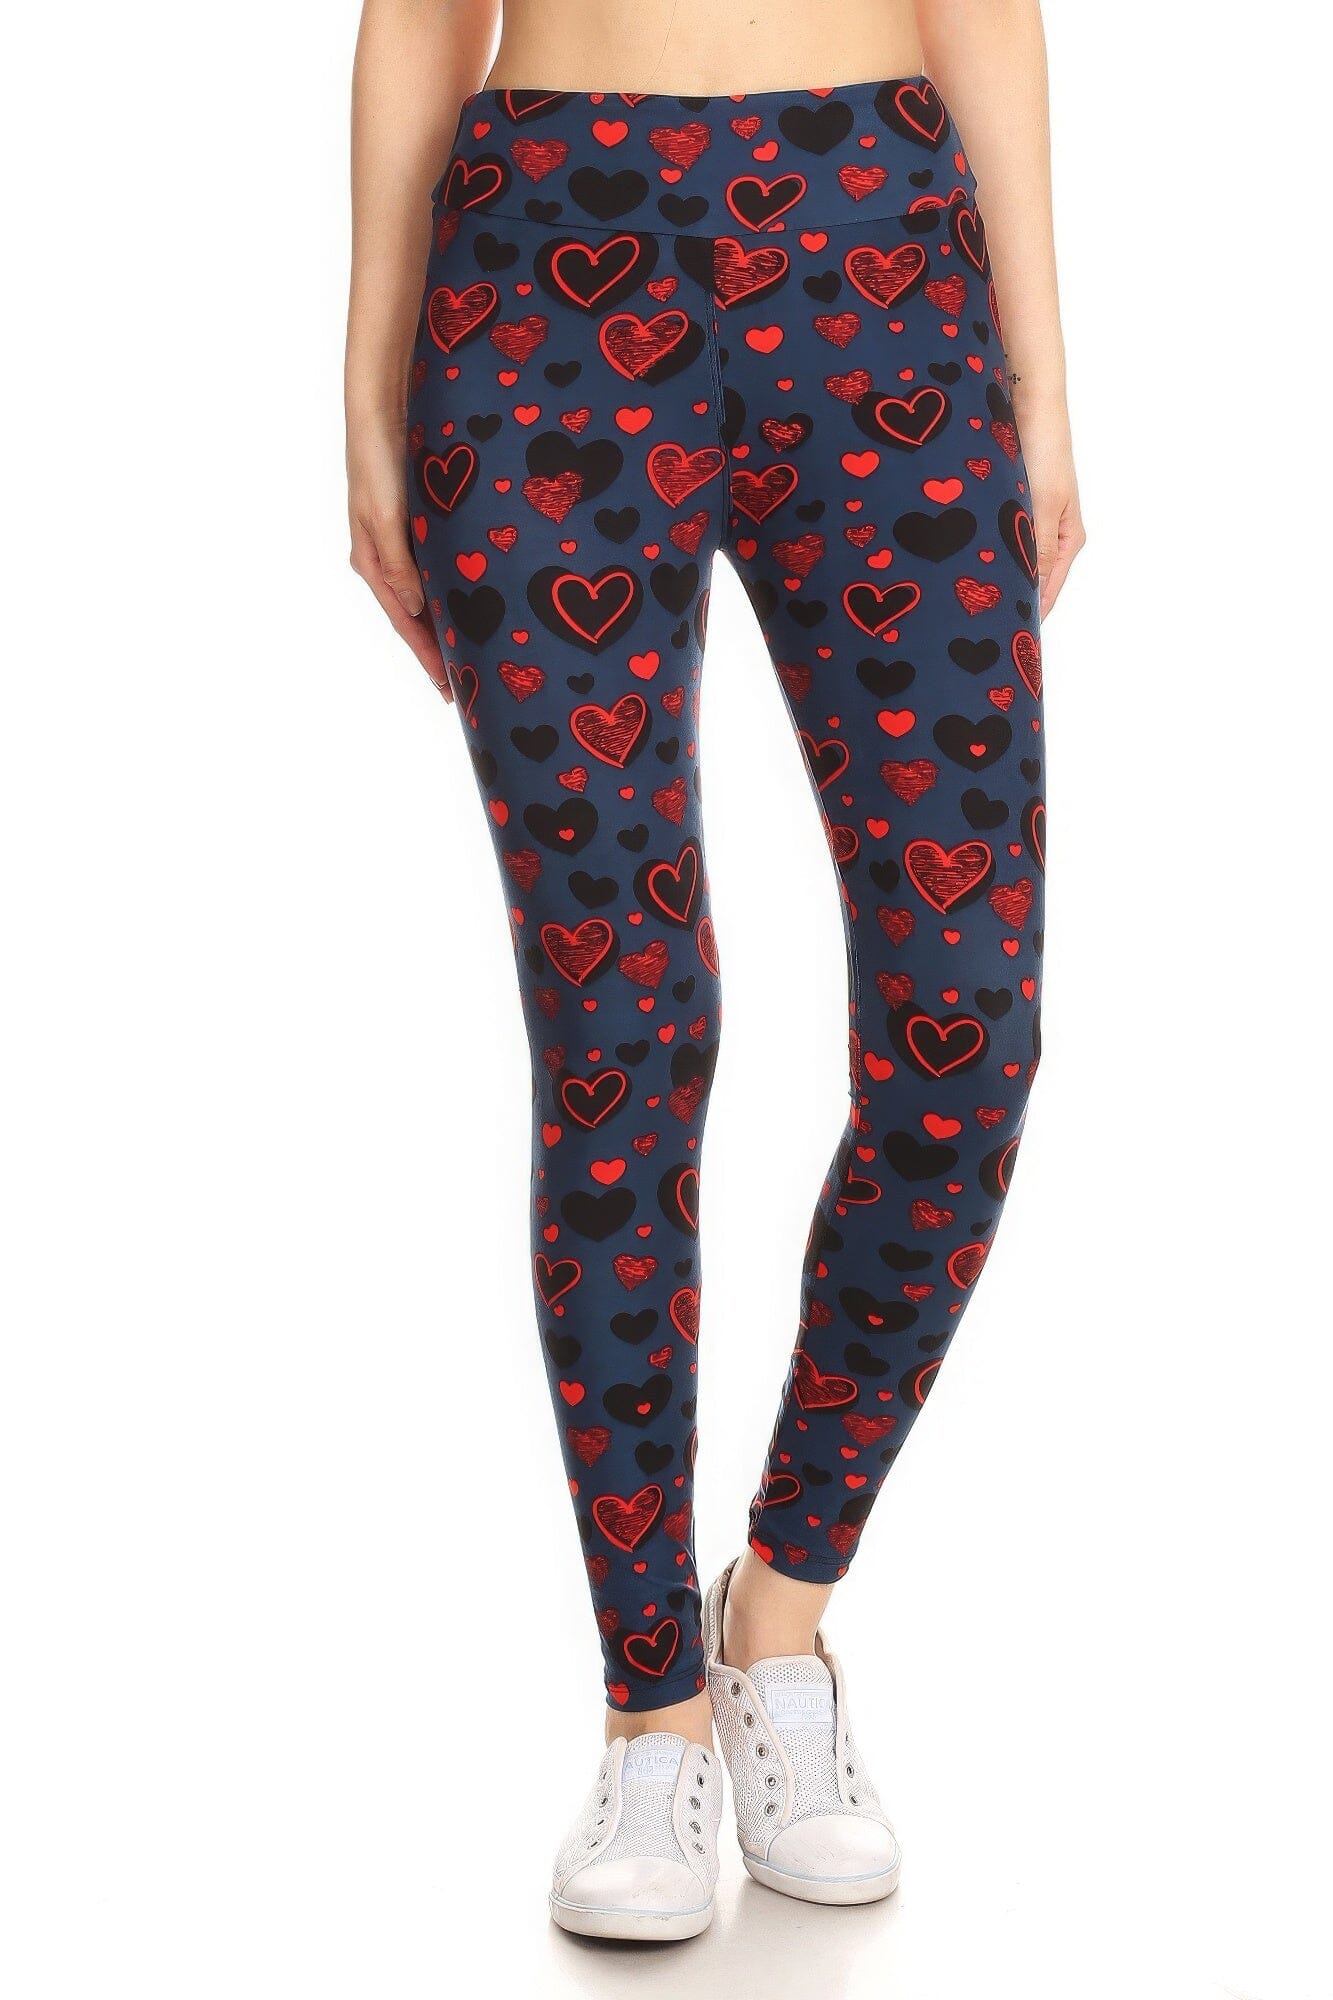 Yoga Style Banded Lined Heart Print In A Slim Fitting Style With A Banded High Waist Full Length Leggings Pants jehouze 